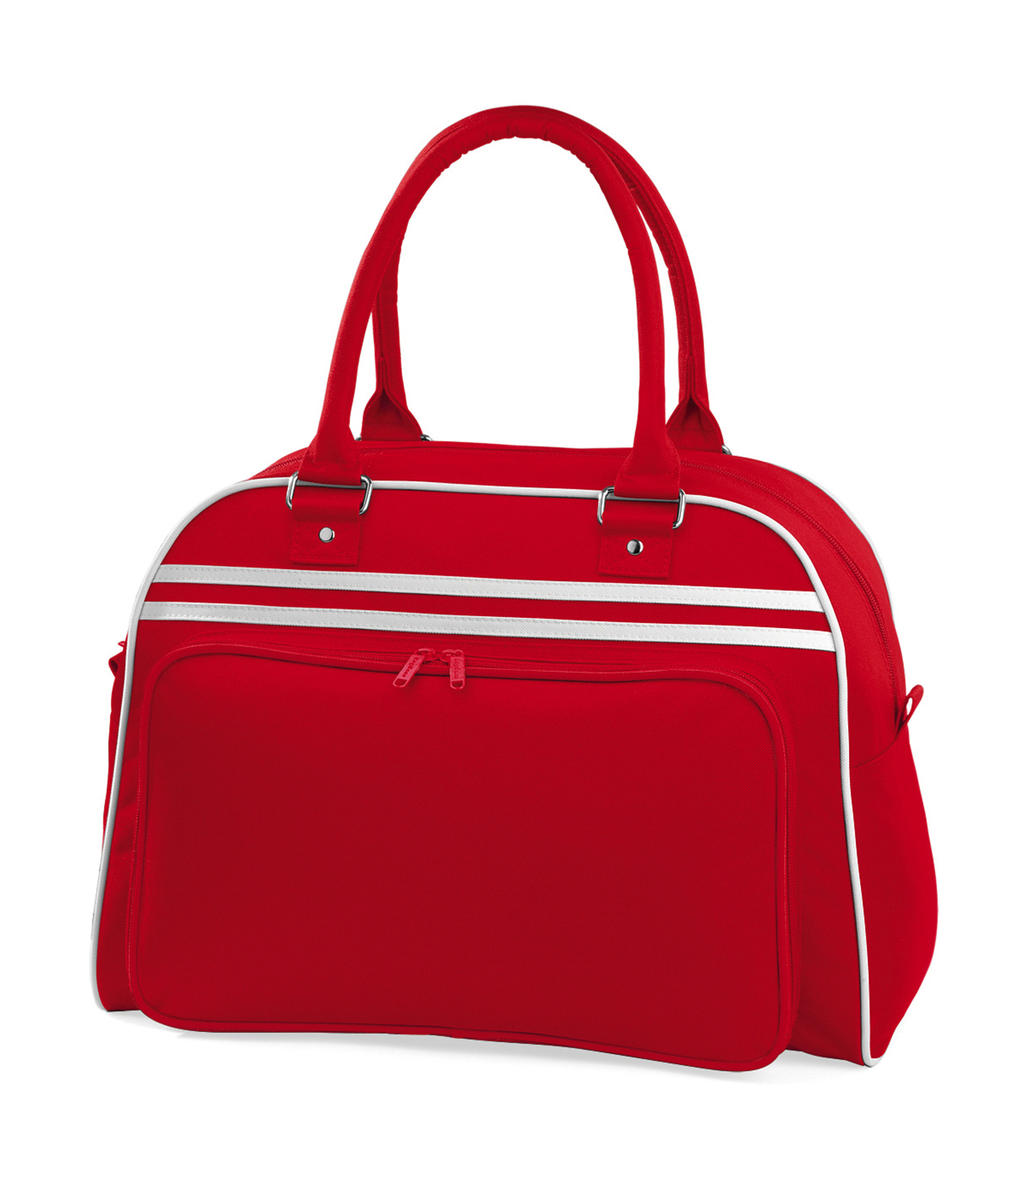  Retro Bowling Bag in Farbe Classic Red/White